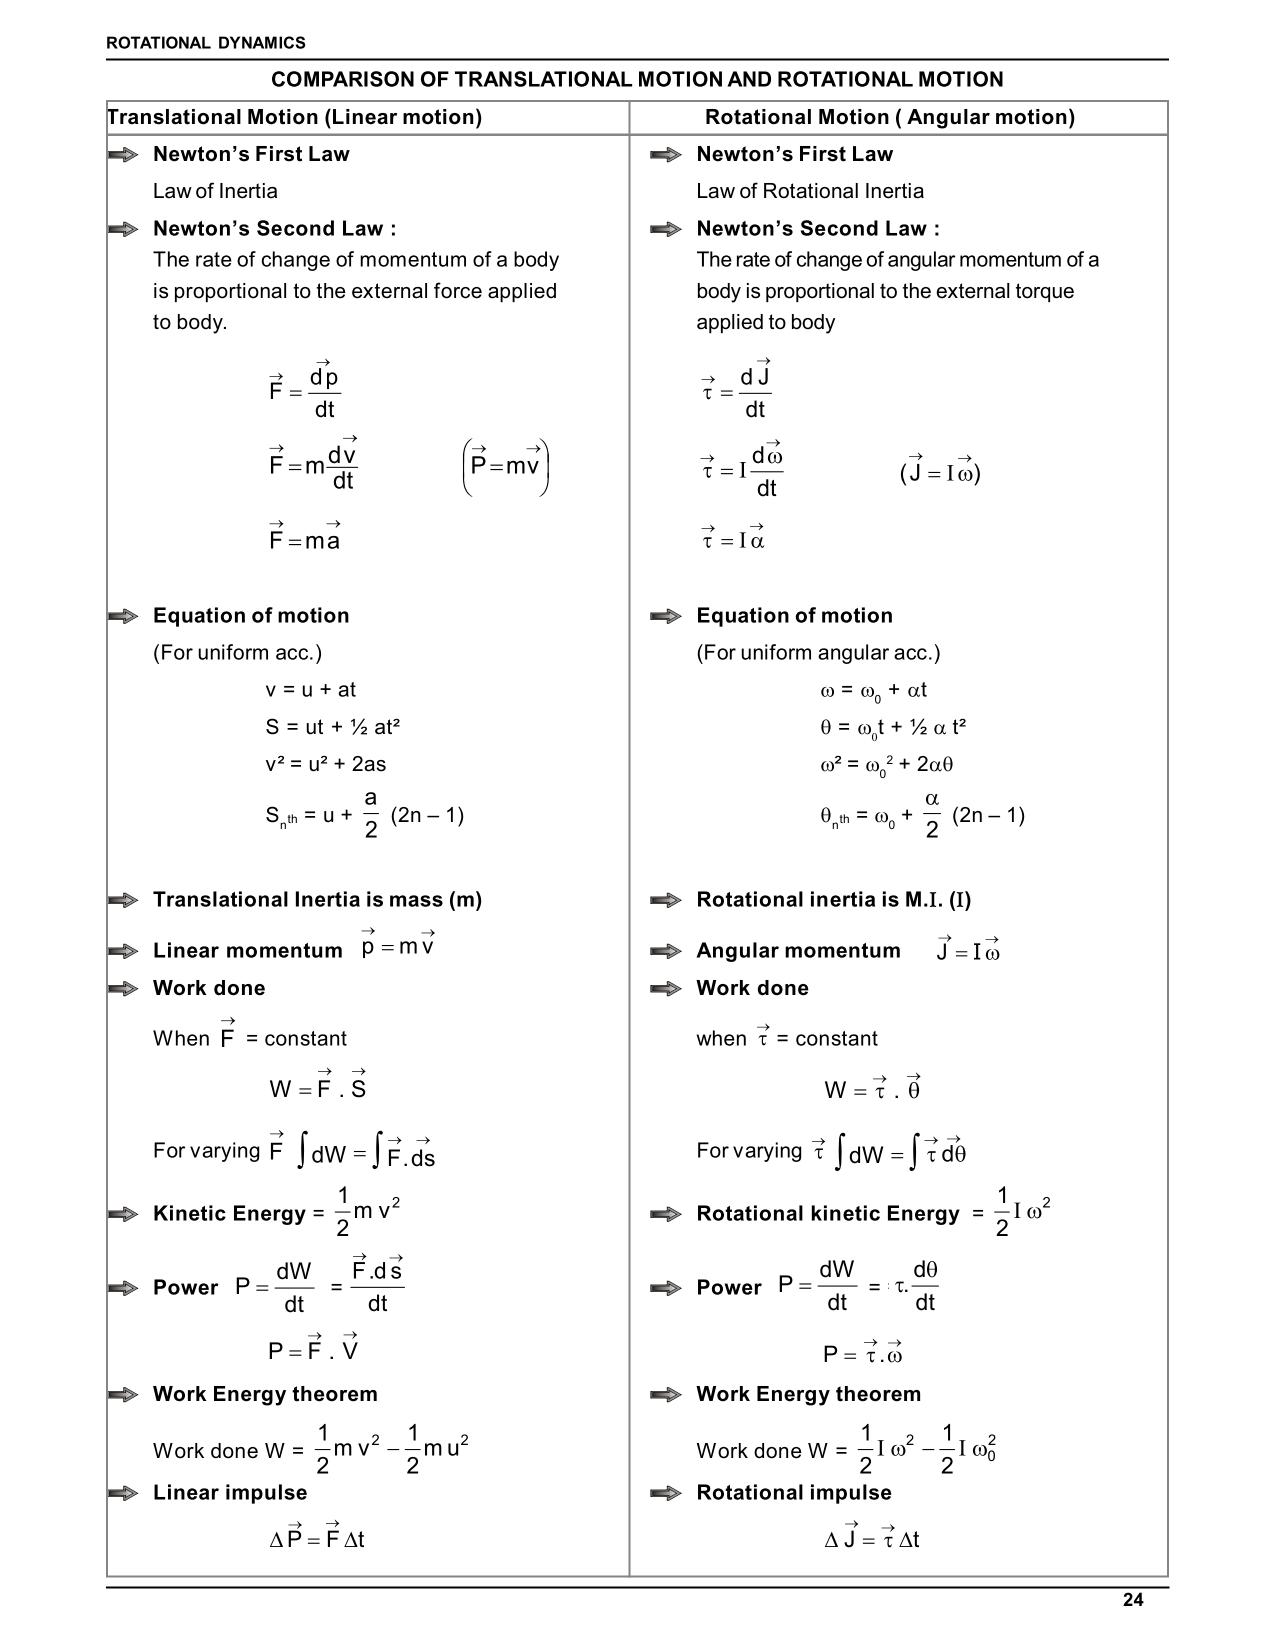 transational motion and rotational motion